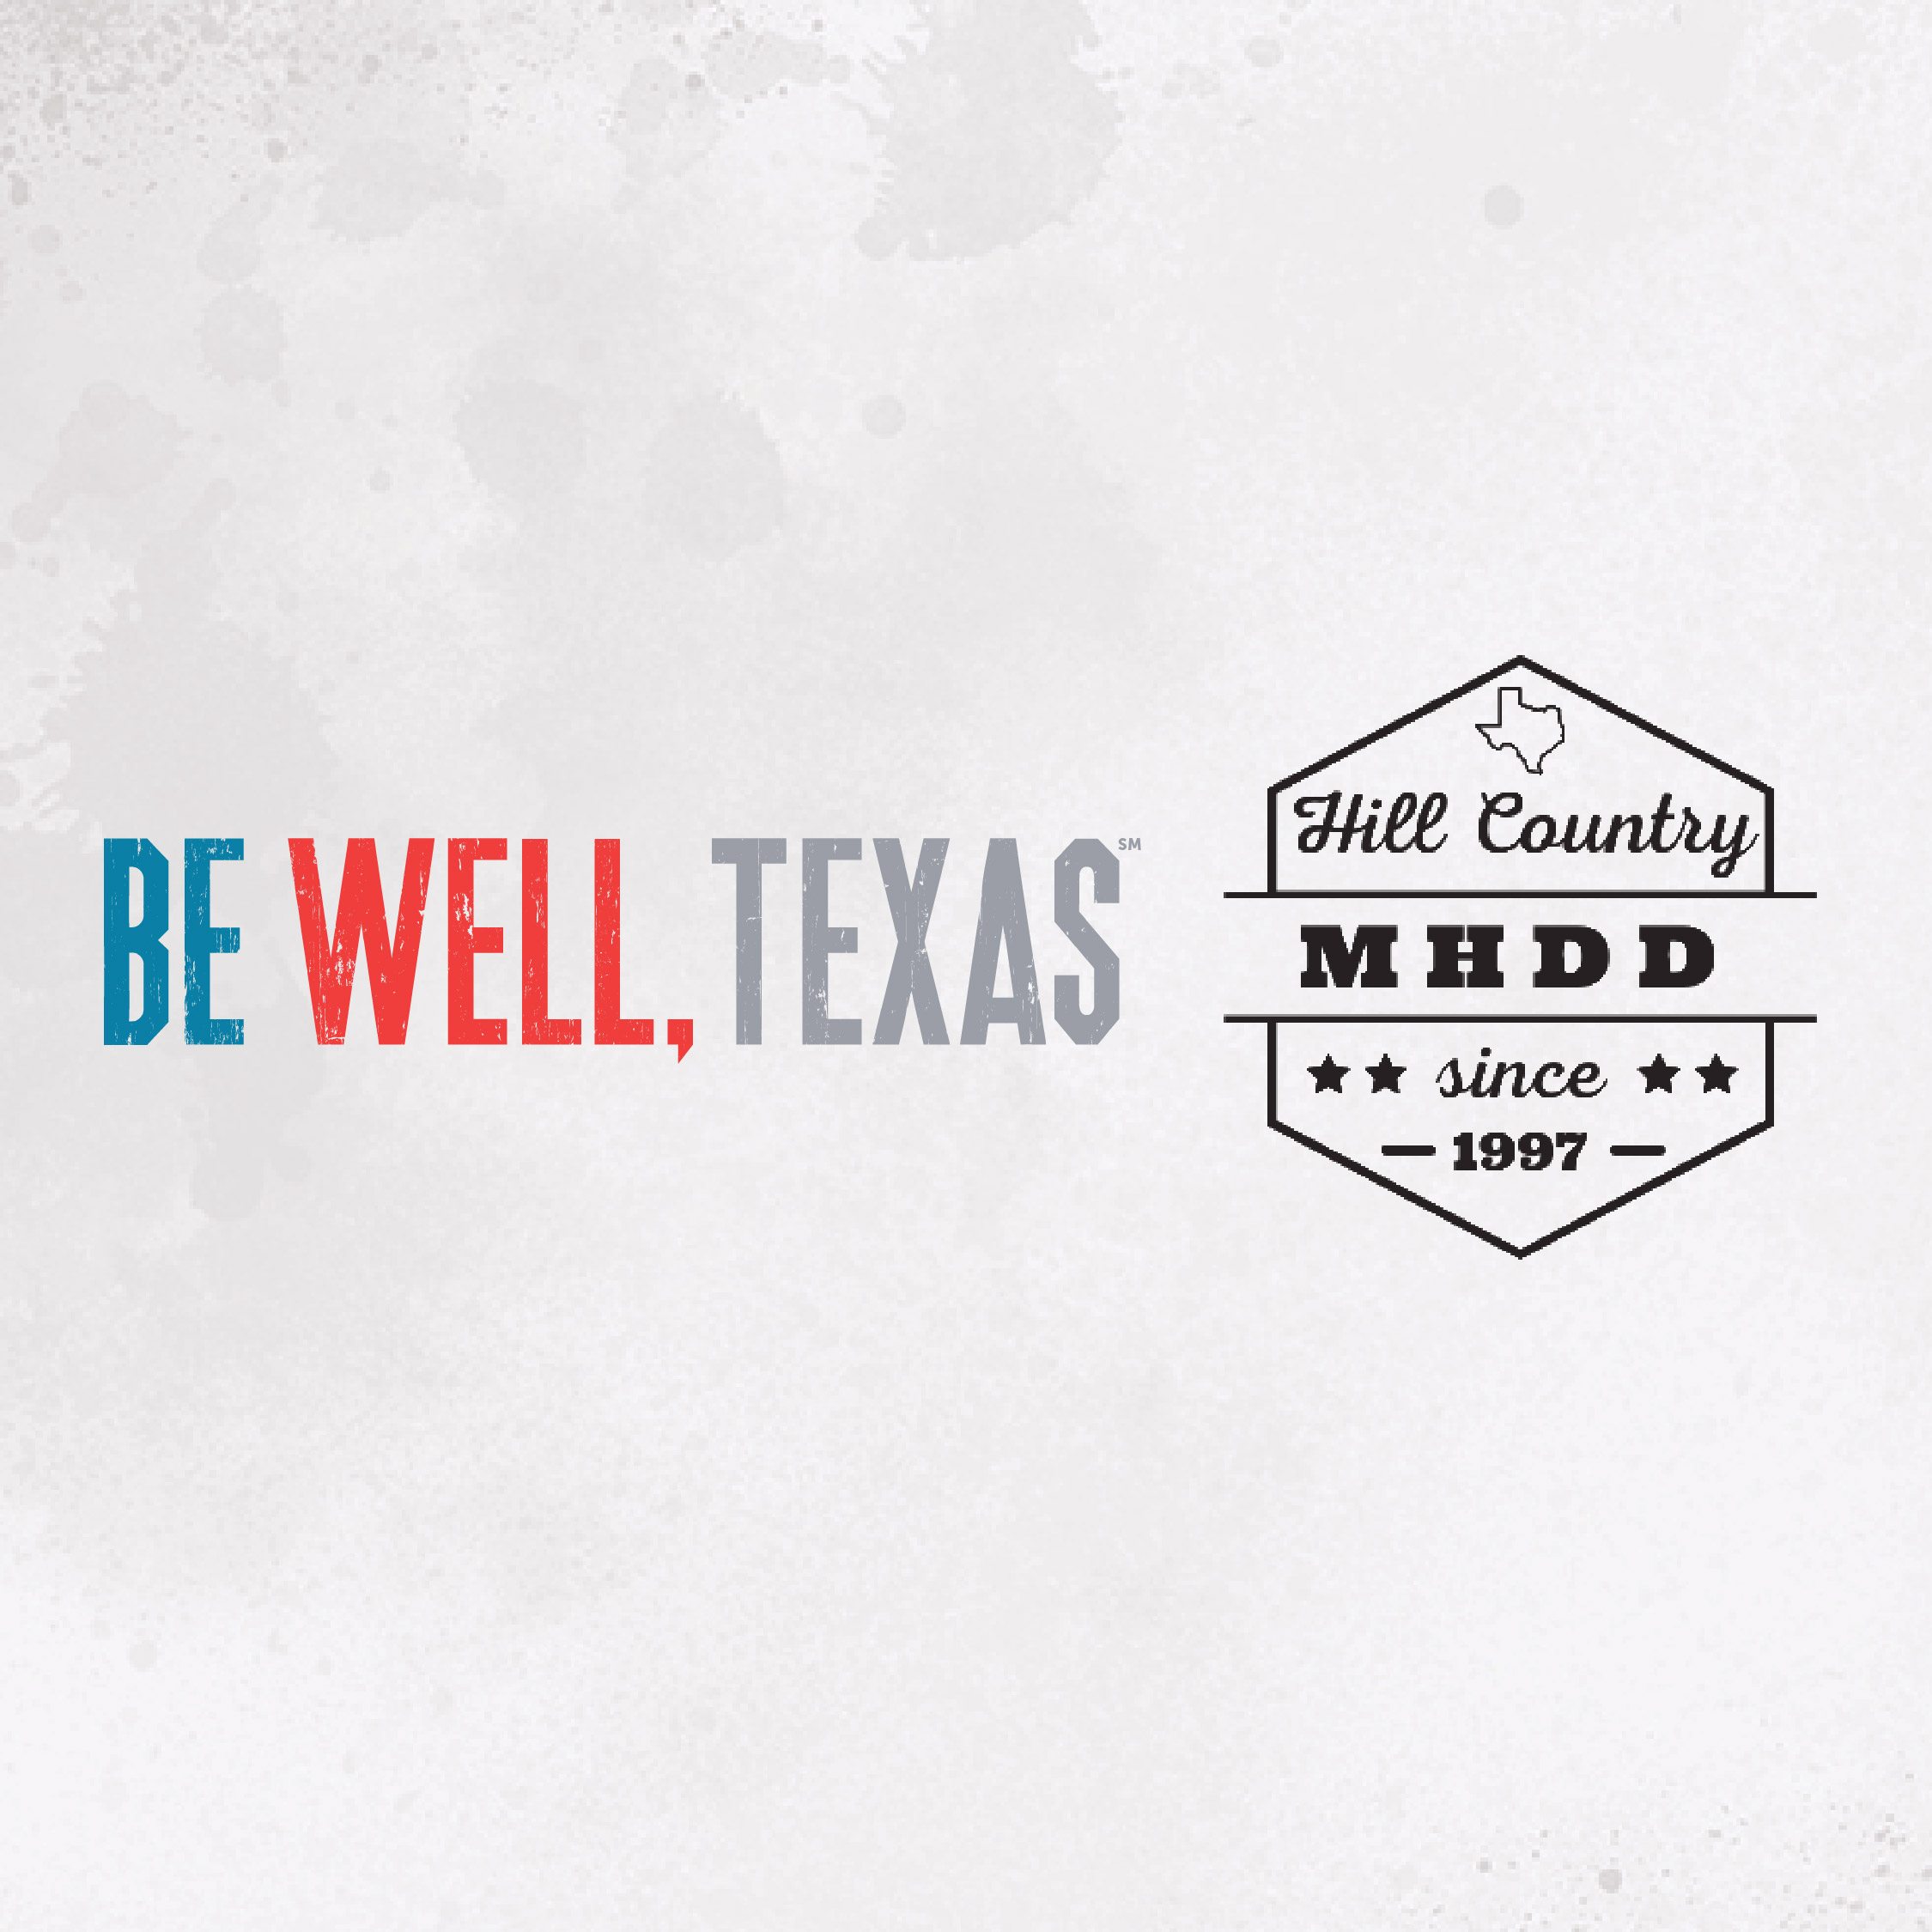 Be Well Texas logo and Hill Country MHDD Center logo